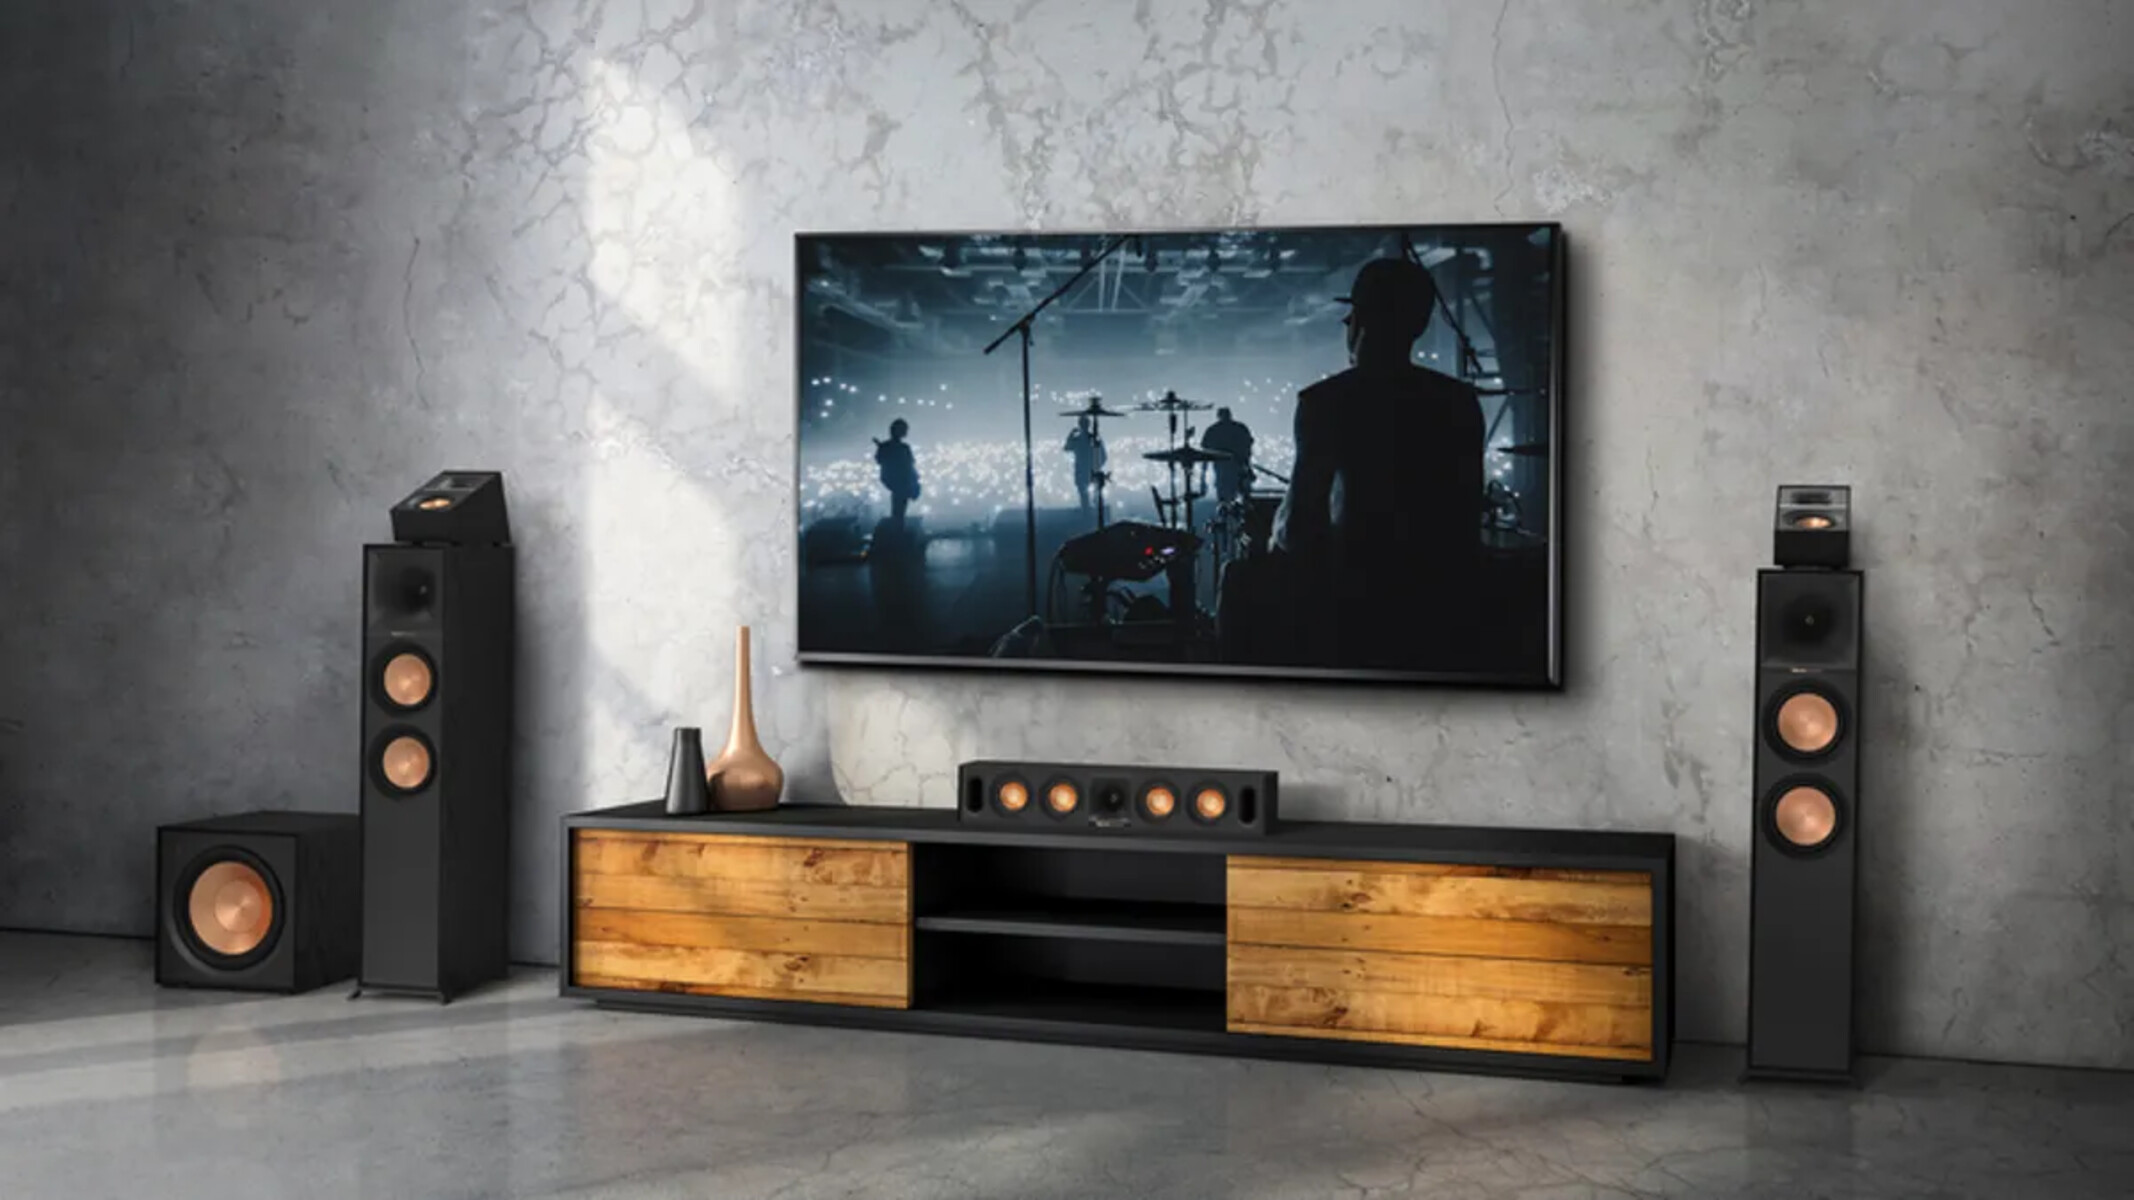 How To Set Up A Soundbar With A Different Surround Sound System